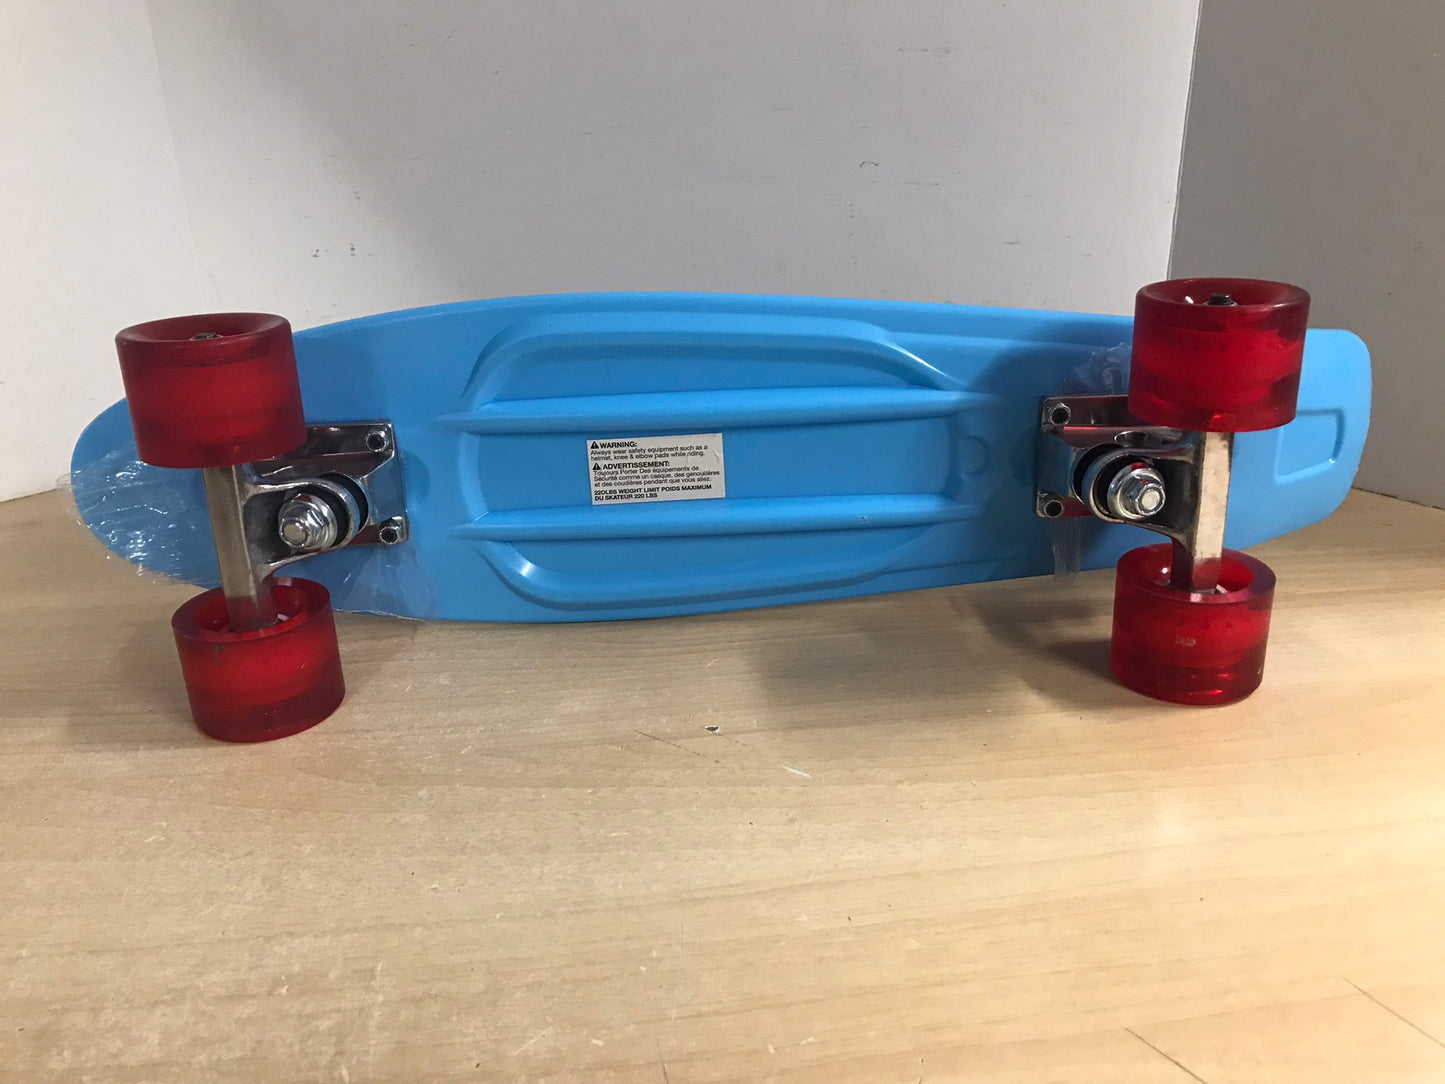 Skateboard Honeycomb Carver 17 inch New Blue With Red Rubber Wheels